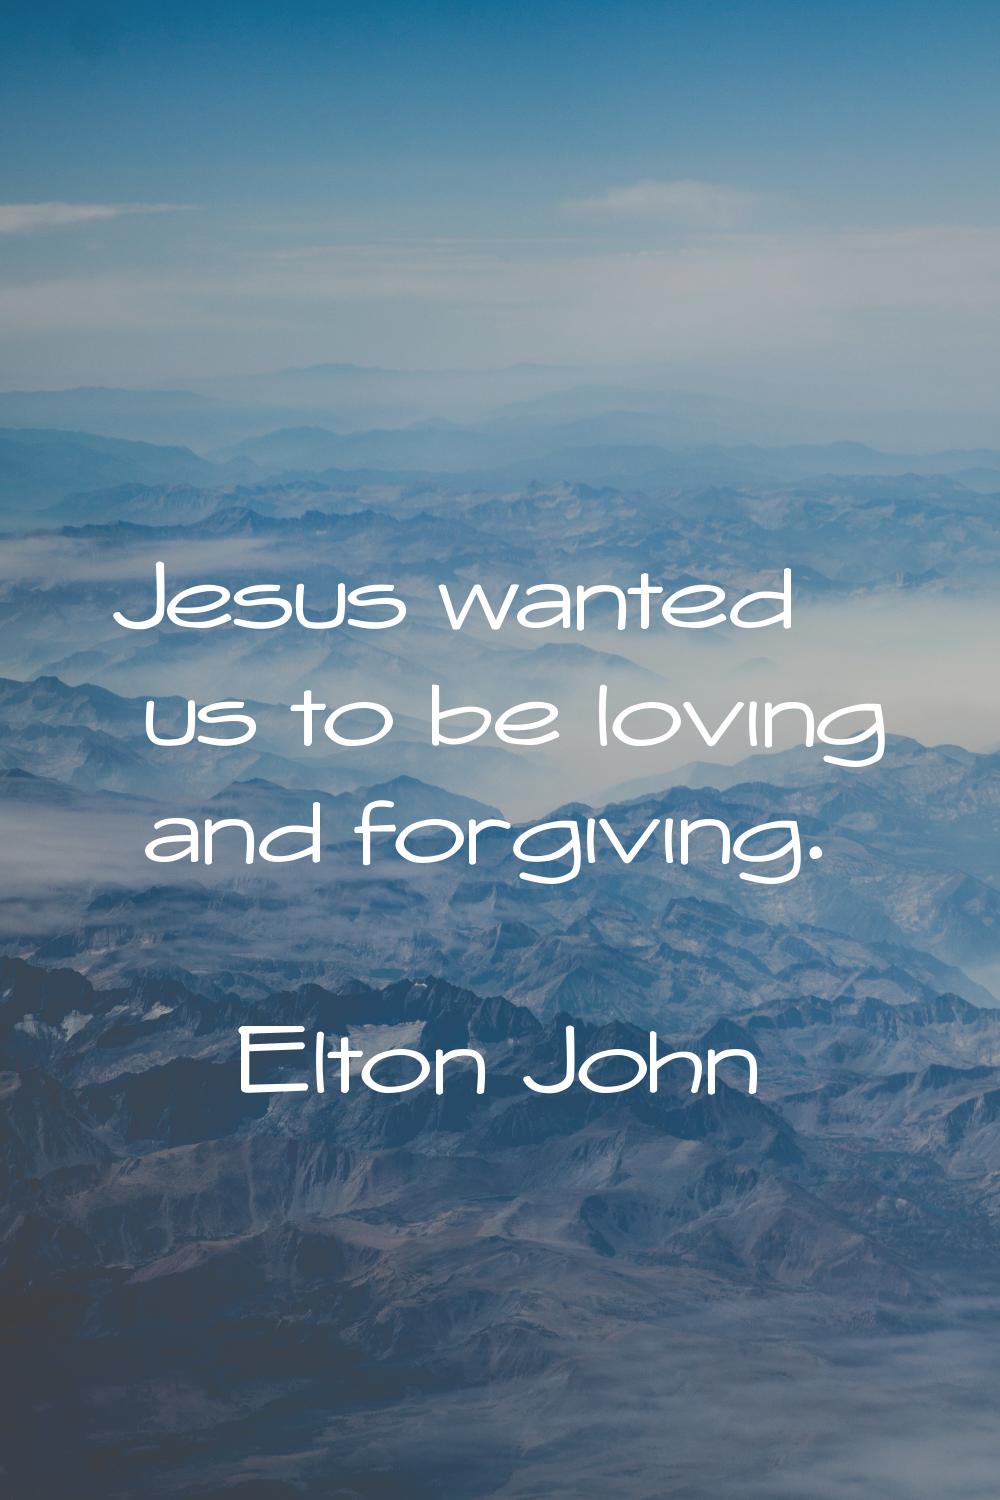 Jesus wanted us to be loving and forgiving.